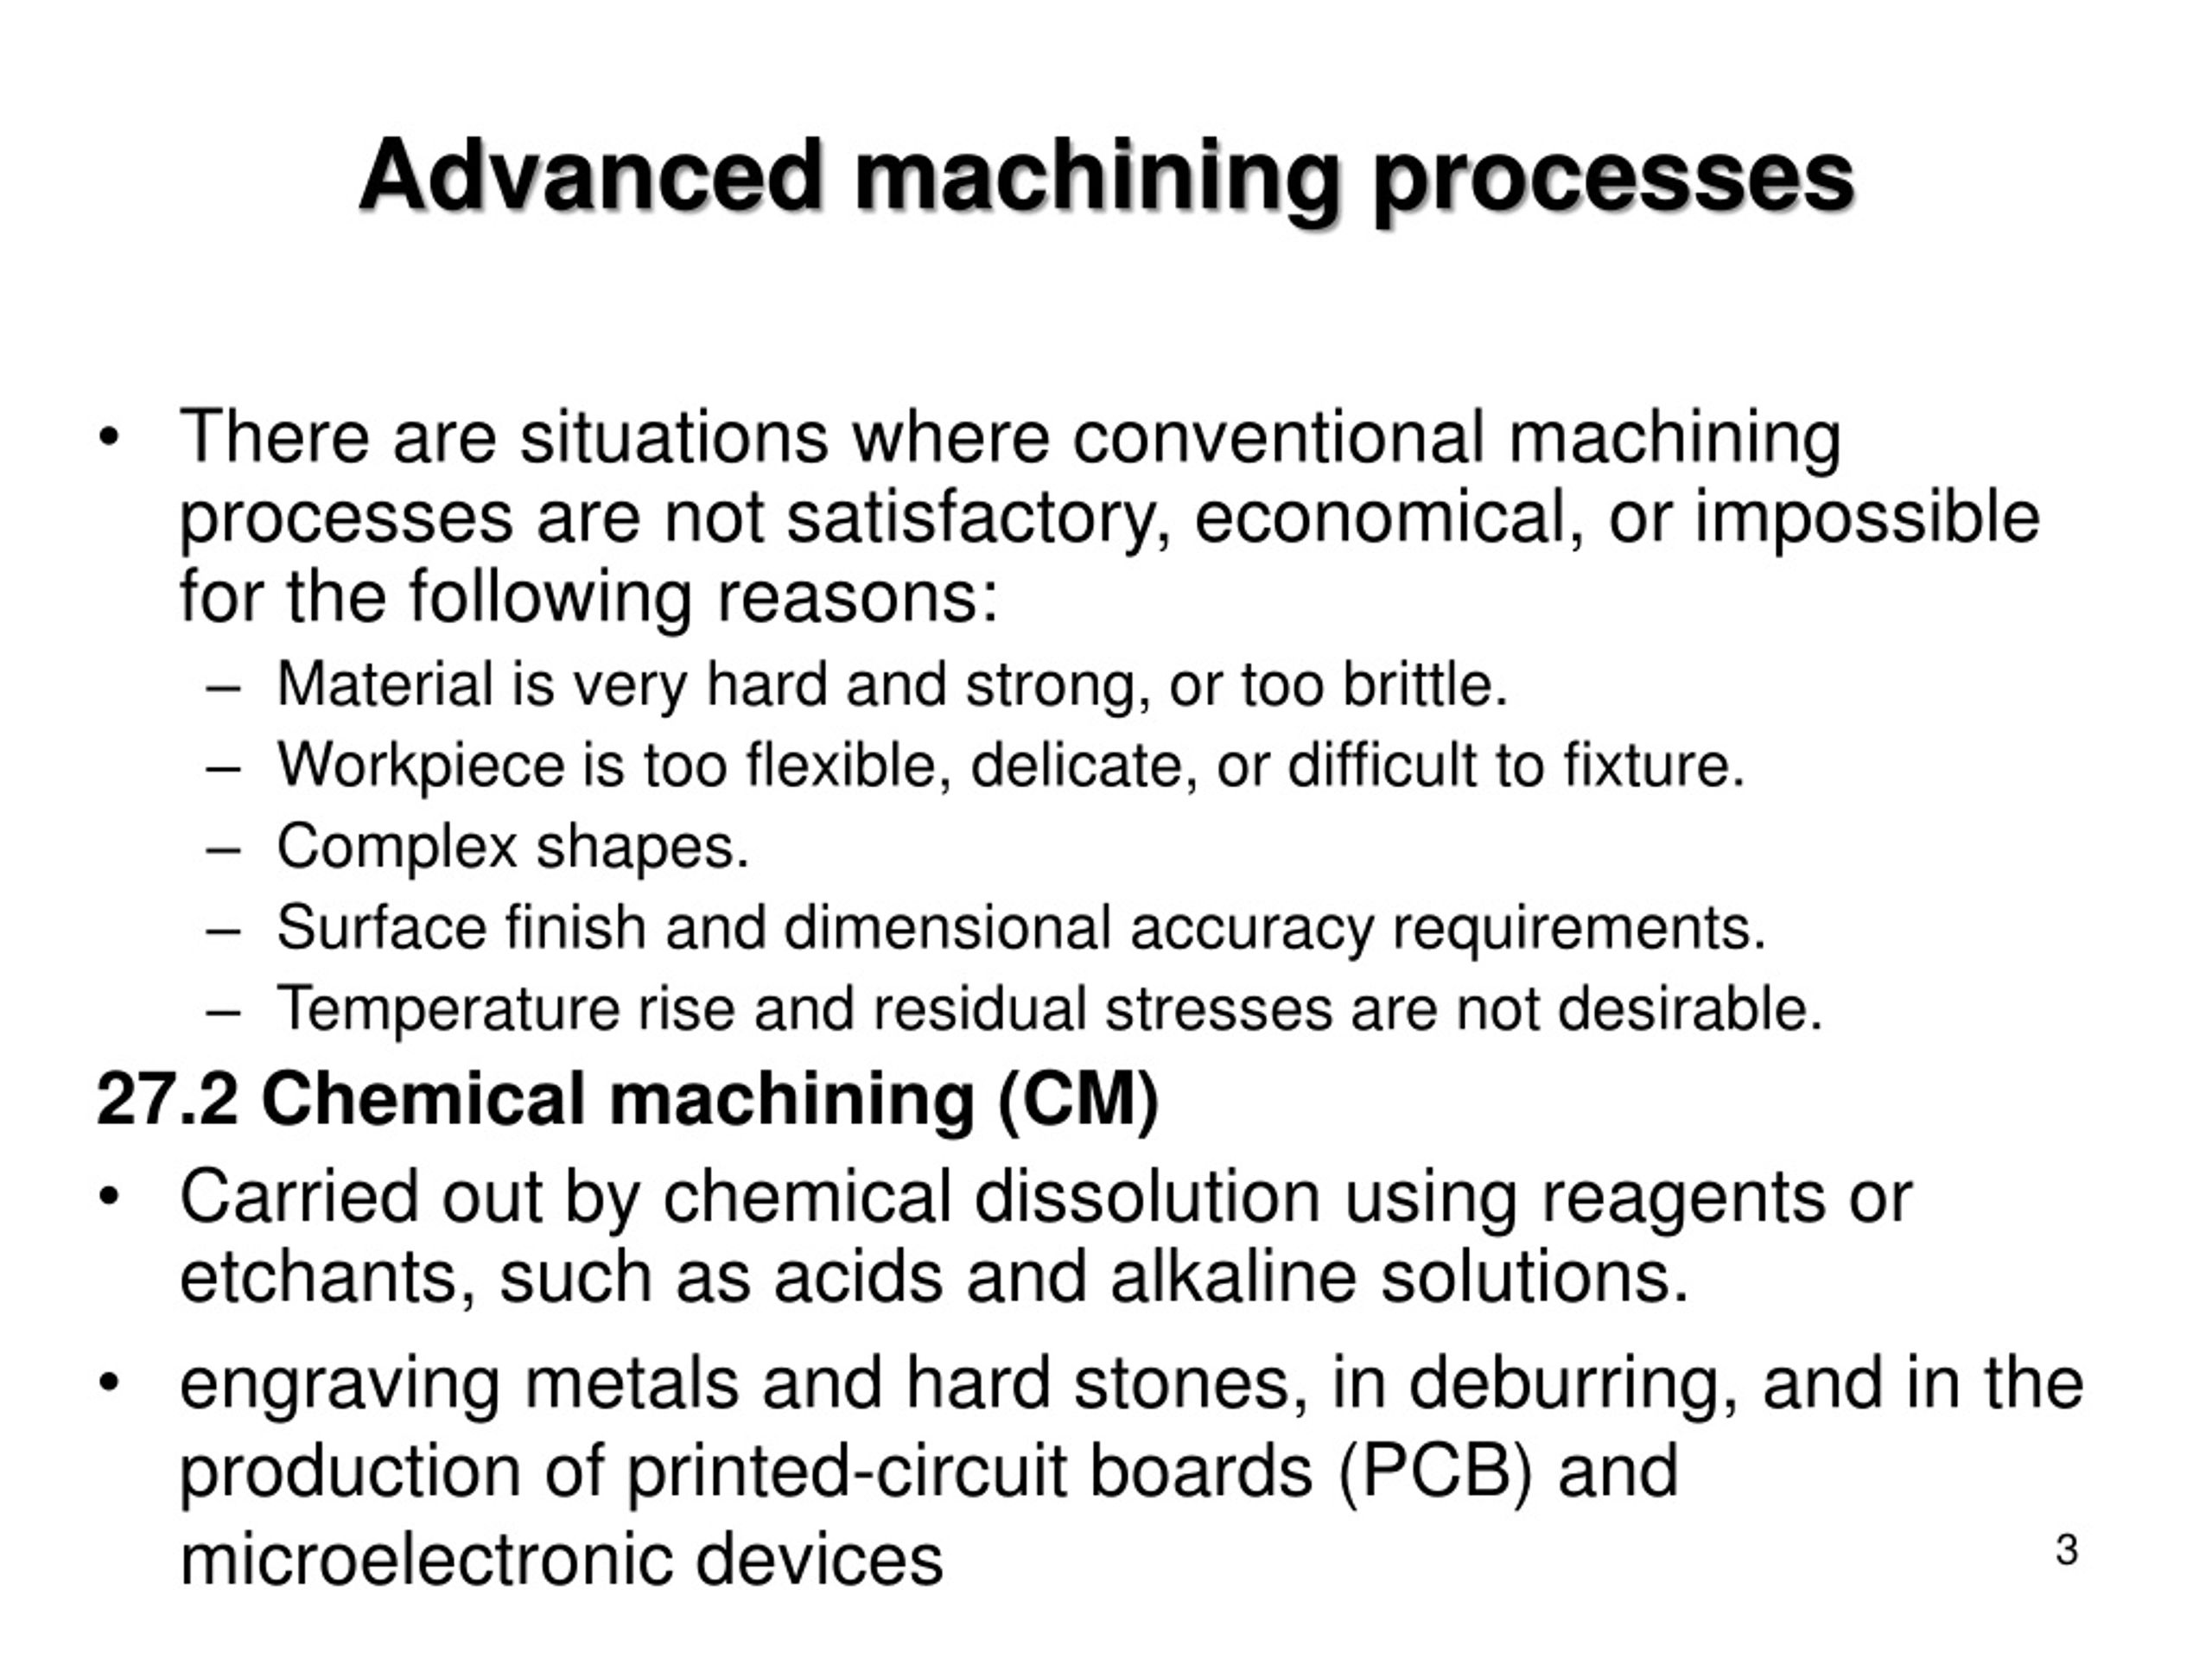 case study of design for advanced machining processes